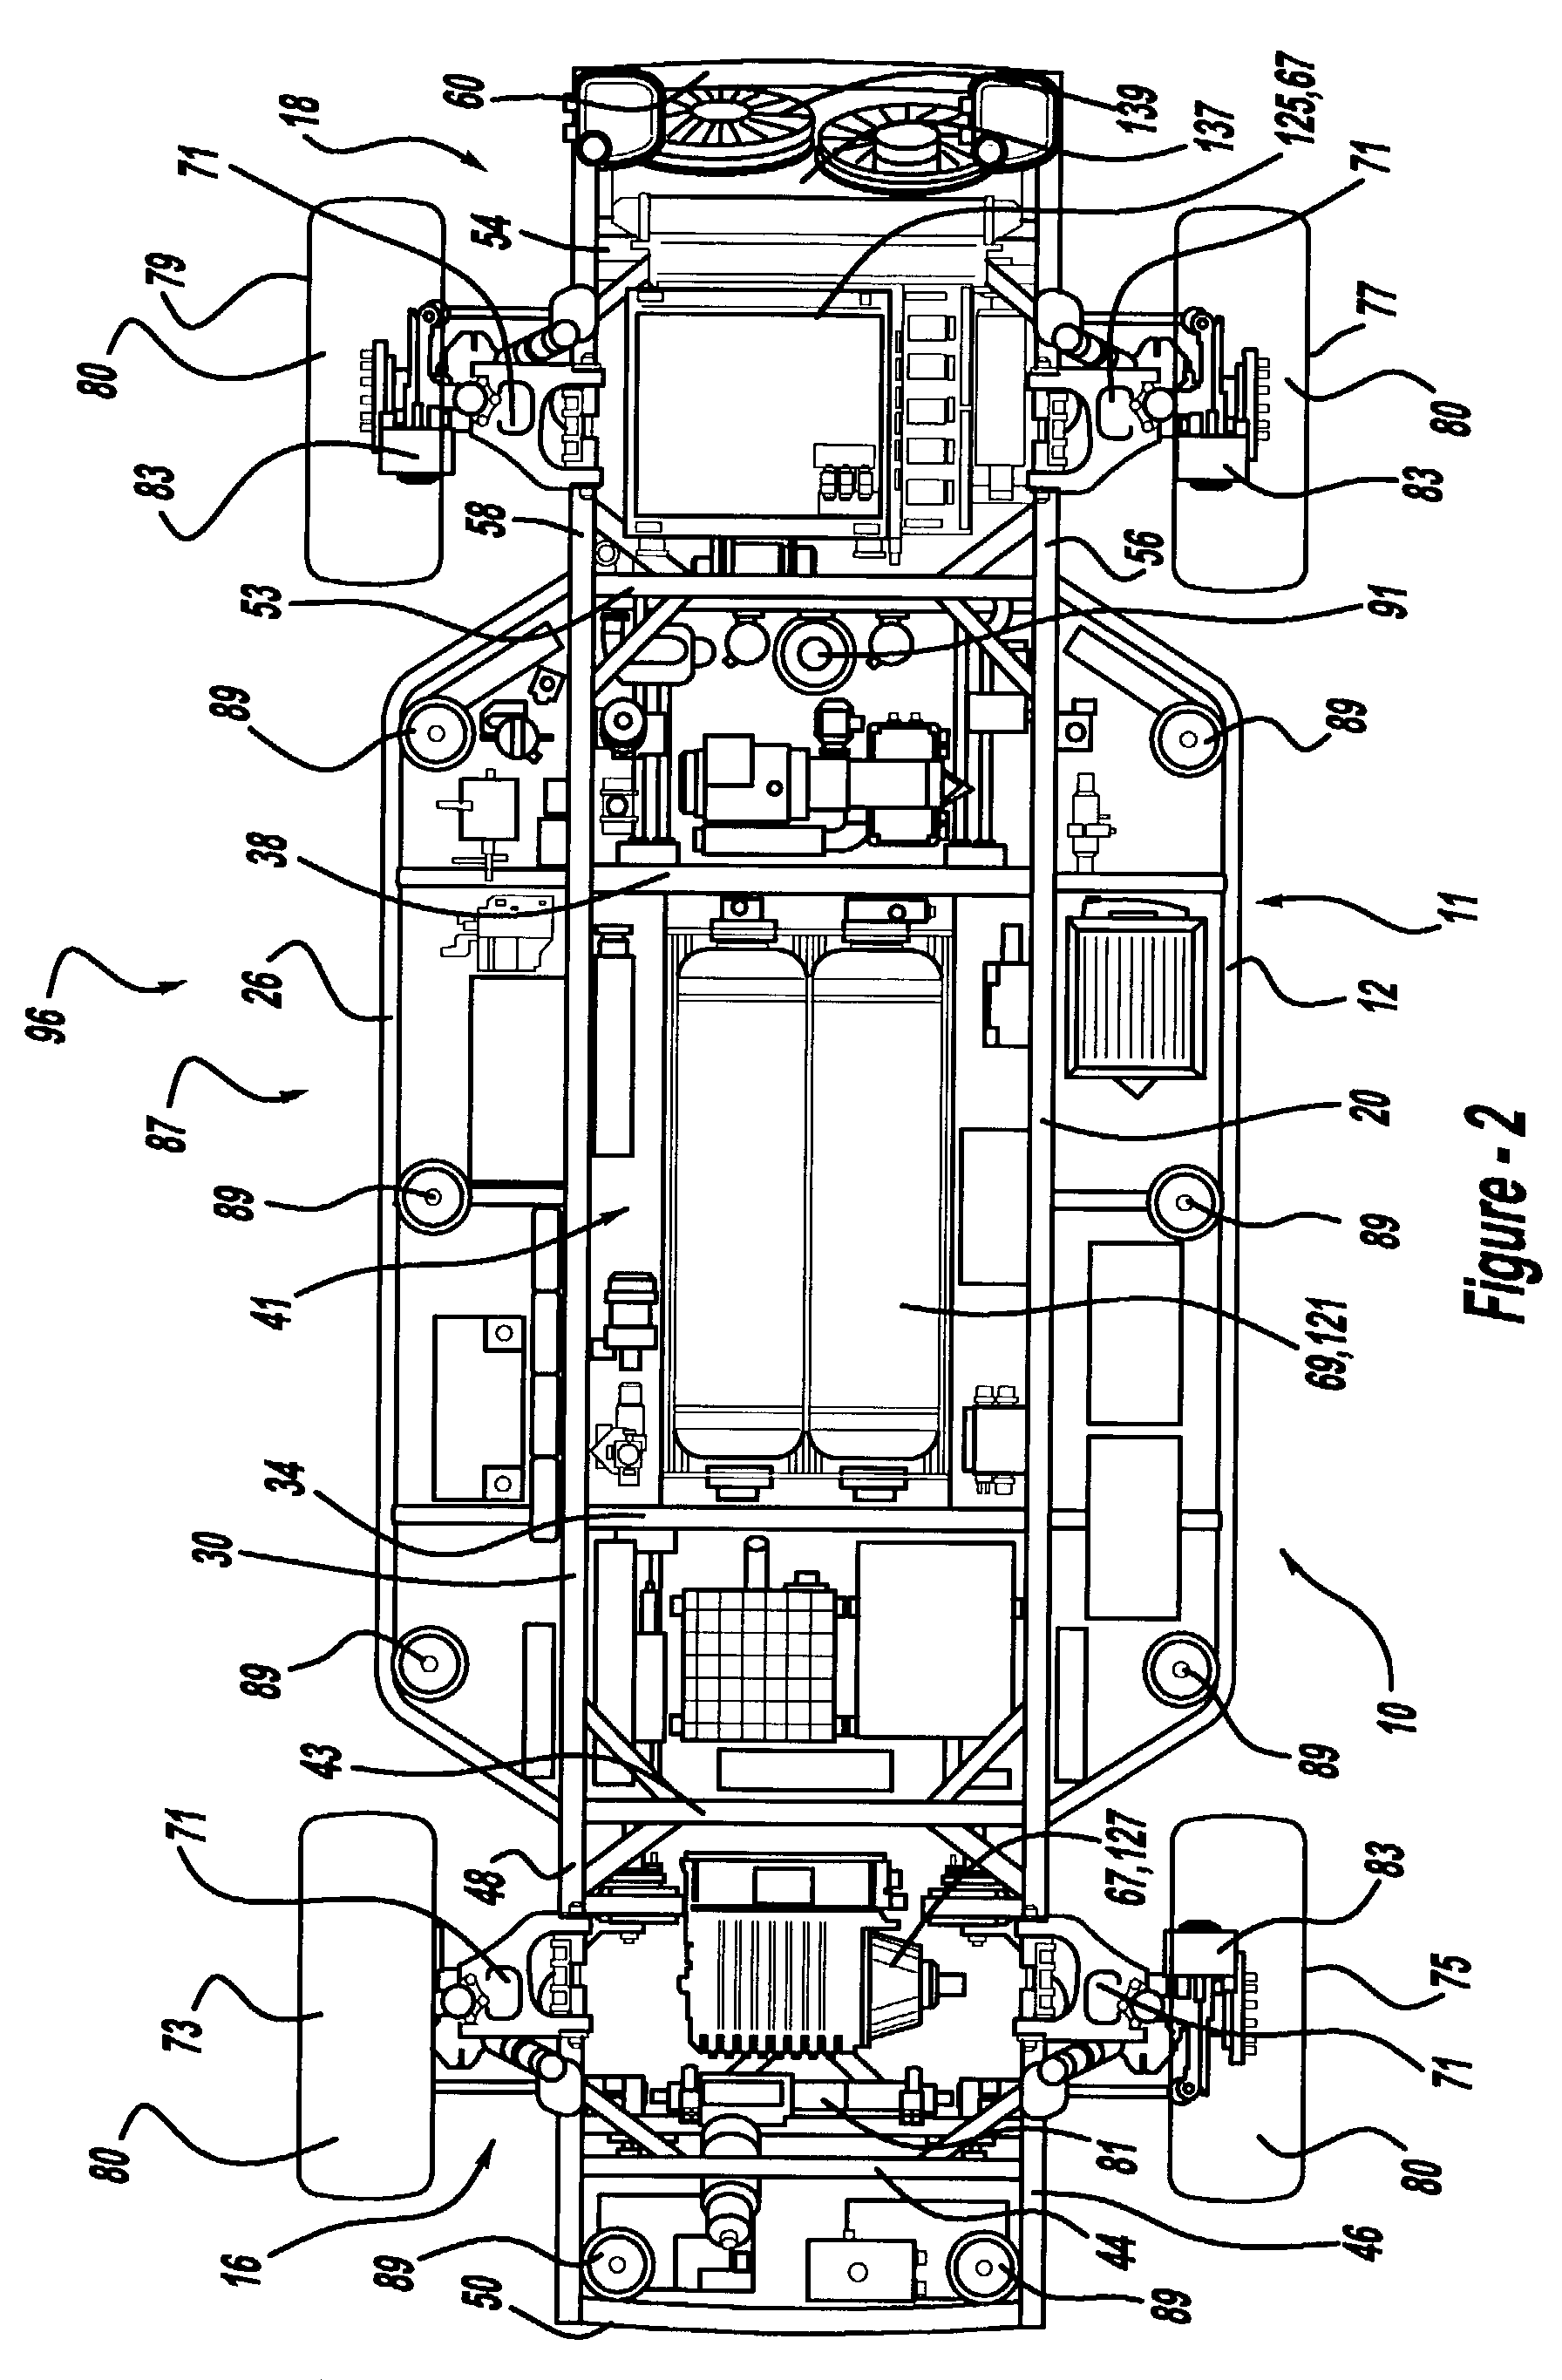 Vehicle chassis having programmable operating characteristics and method for using same